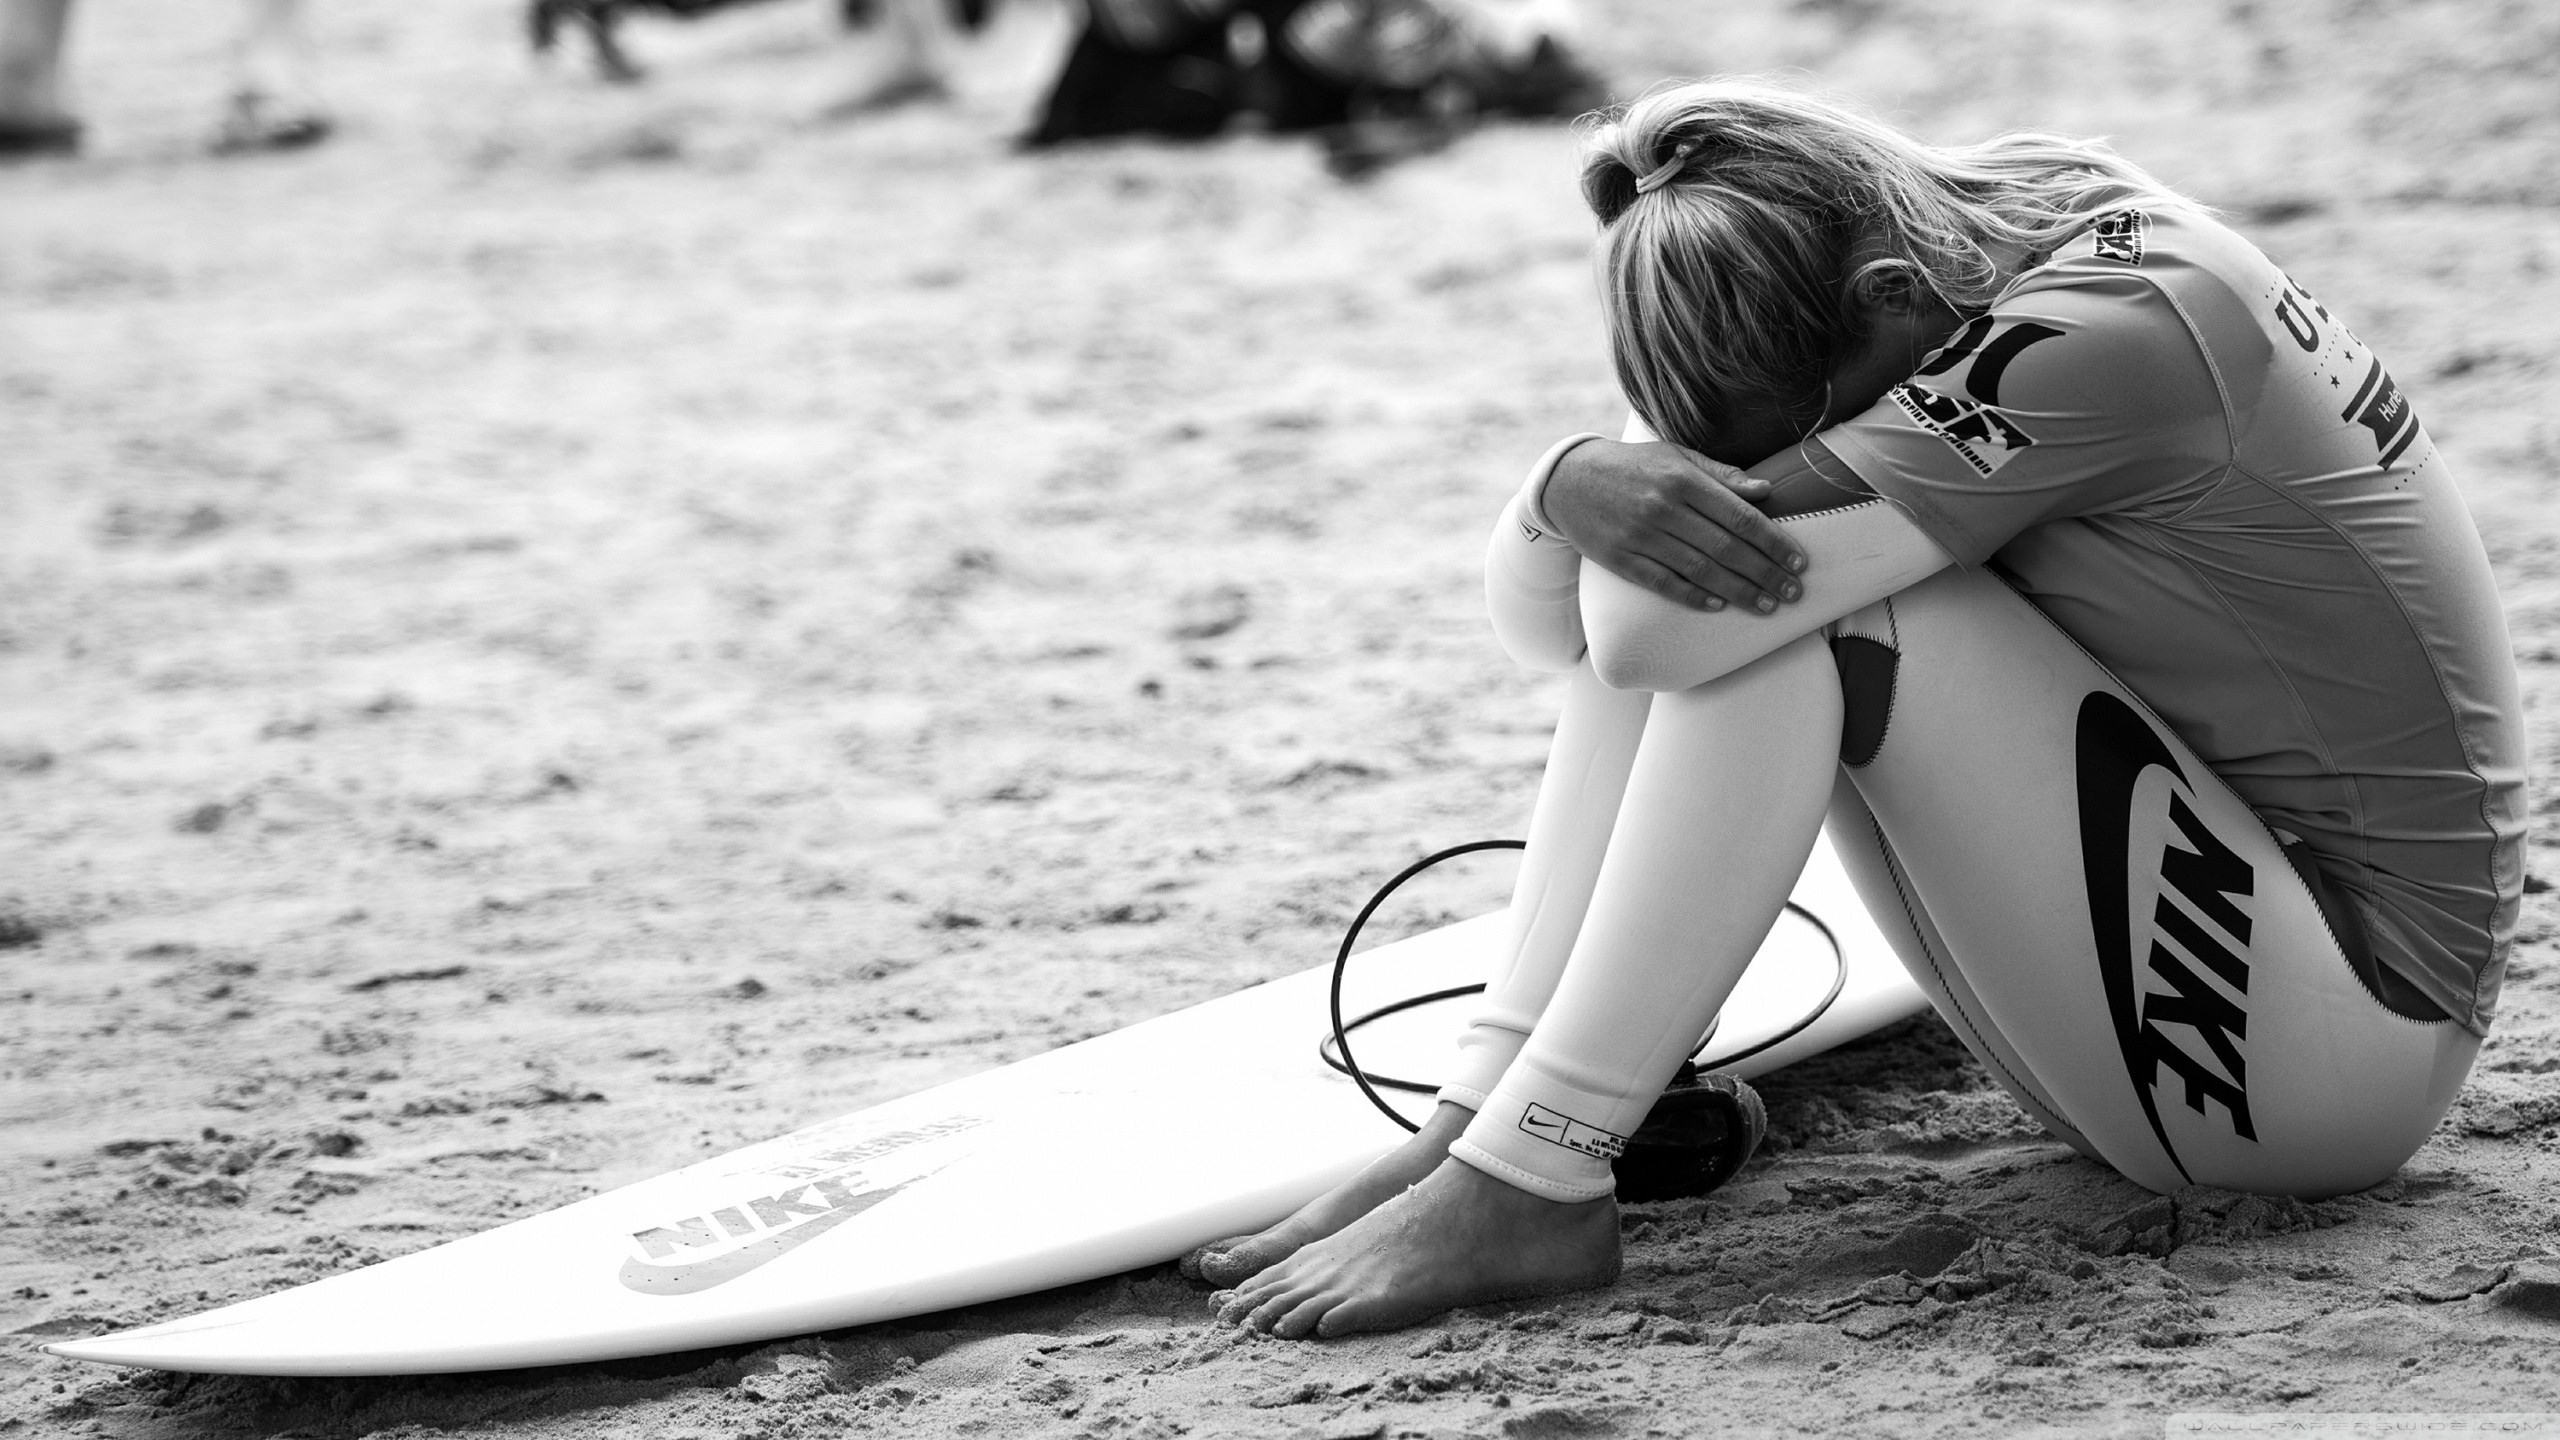 Surfing Surfer Girl Sport Nike Bw Stock Photos Image HD